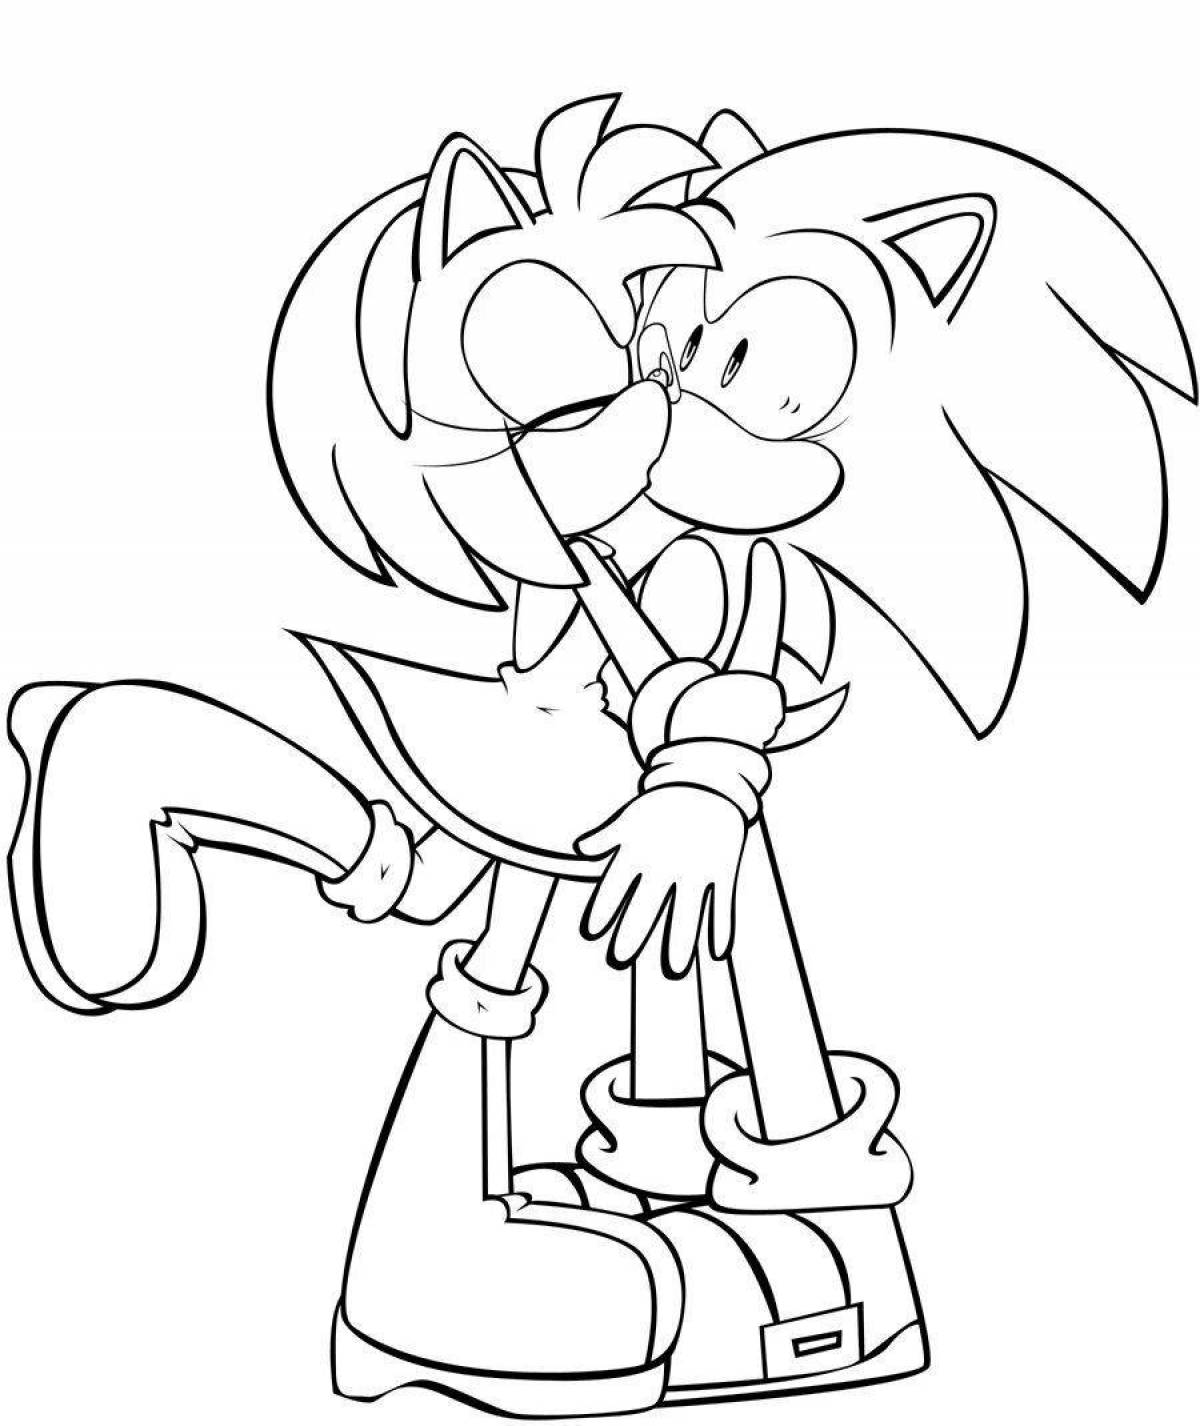 Sonic girl amazing coloring book